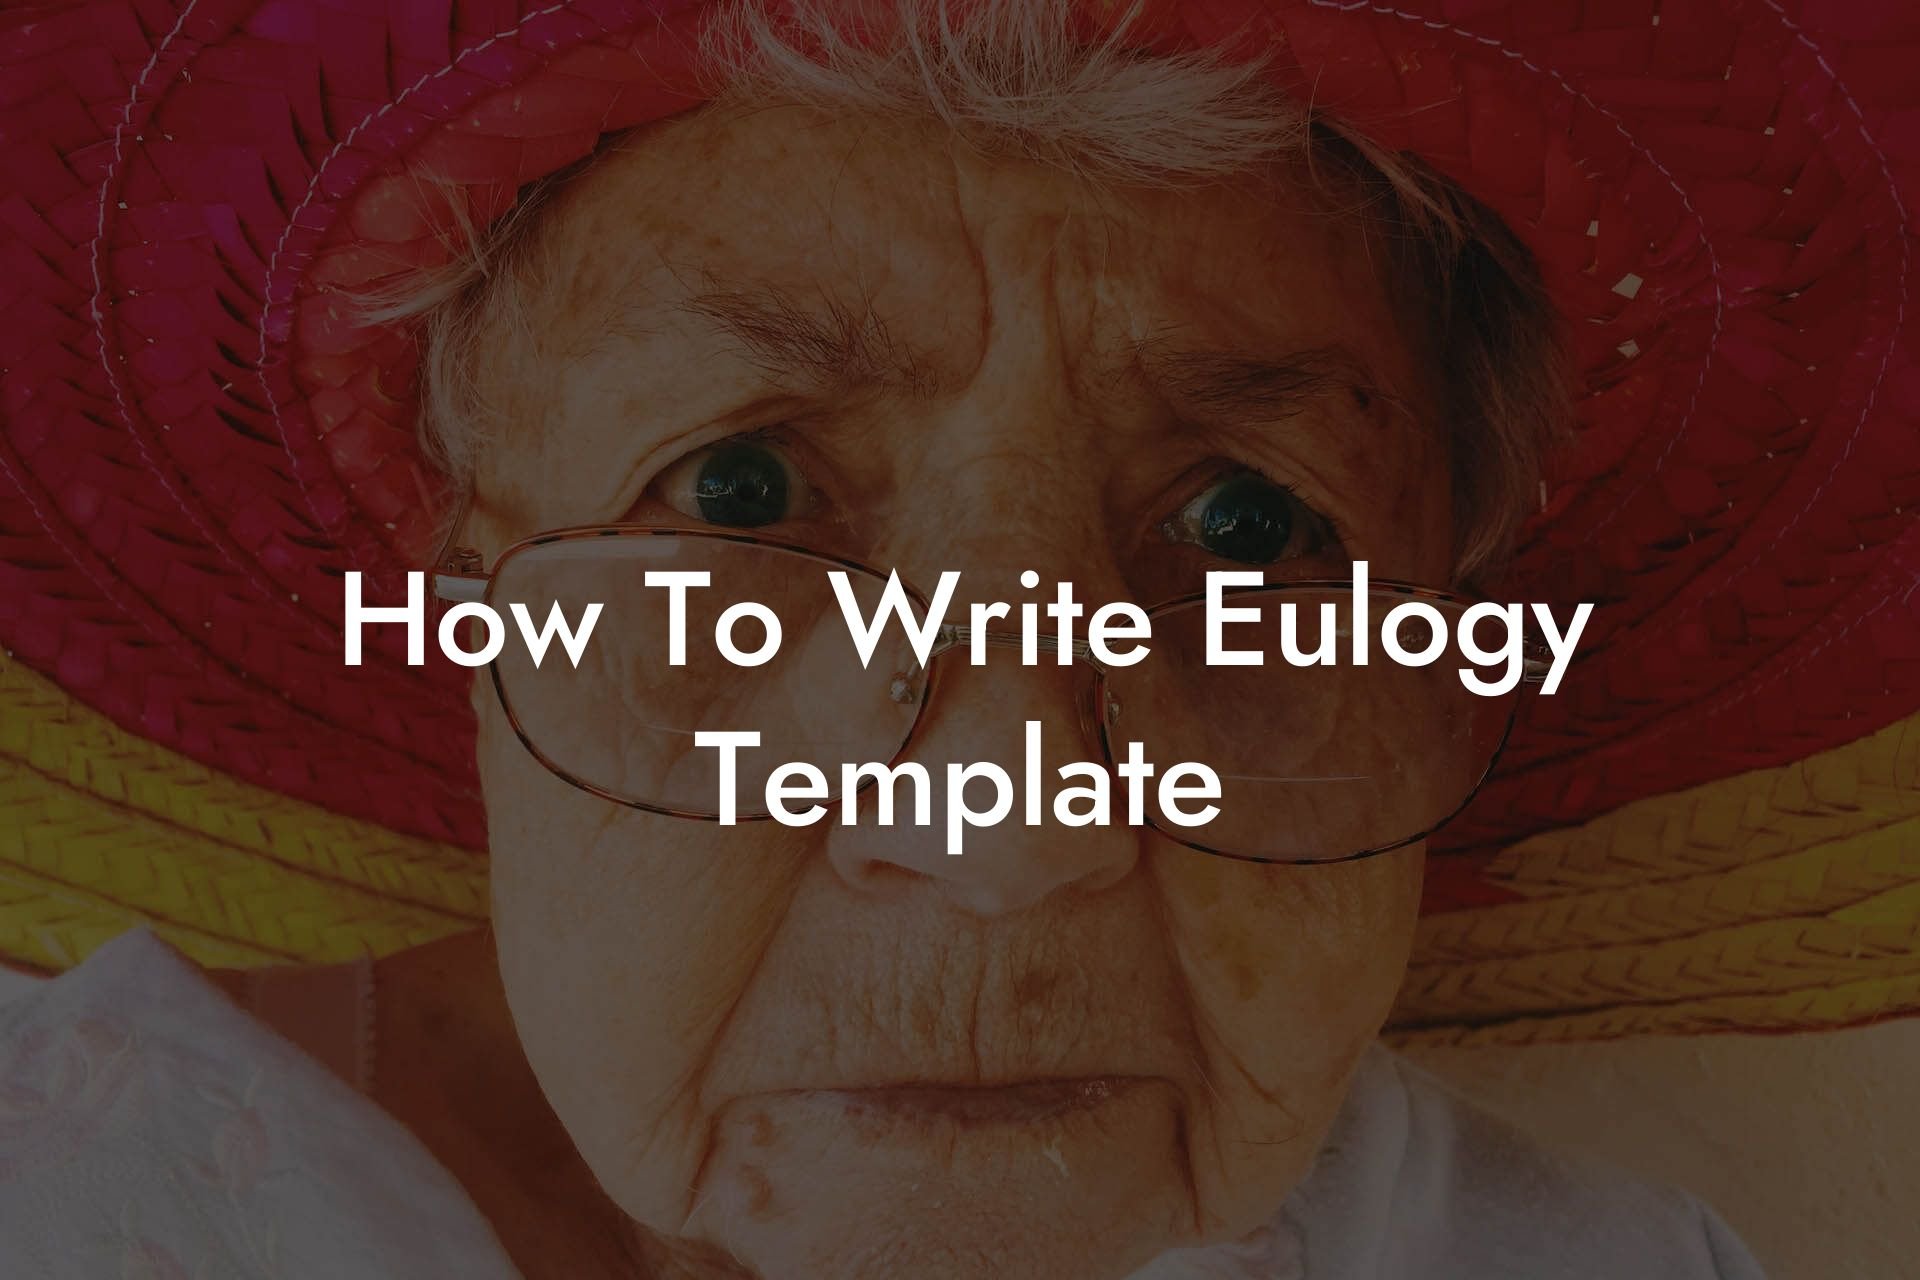 How To Write Eulogy Template